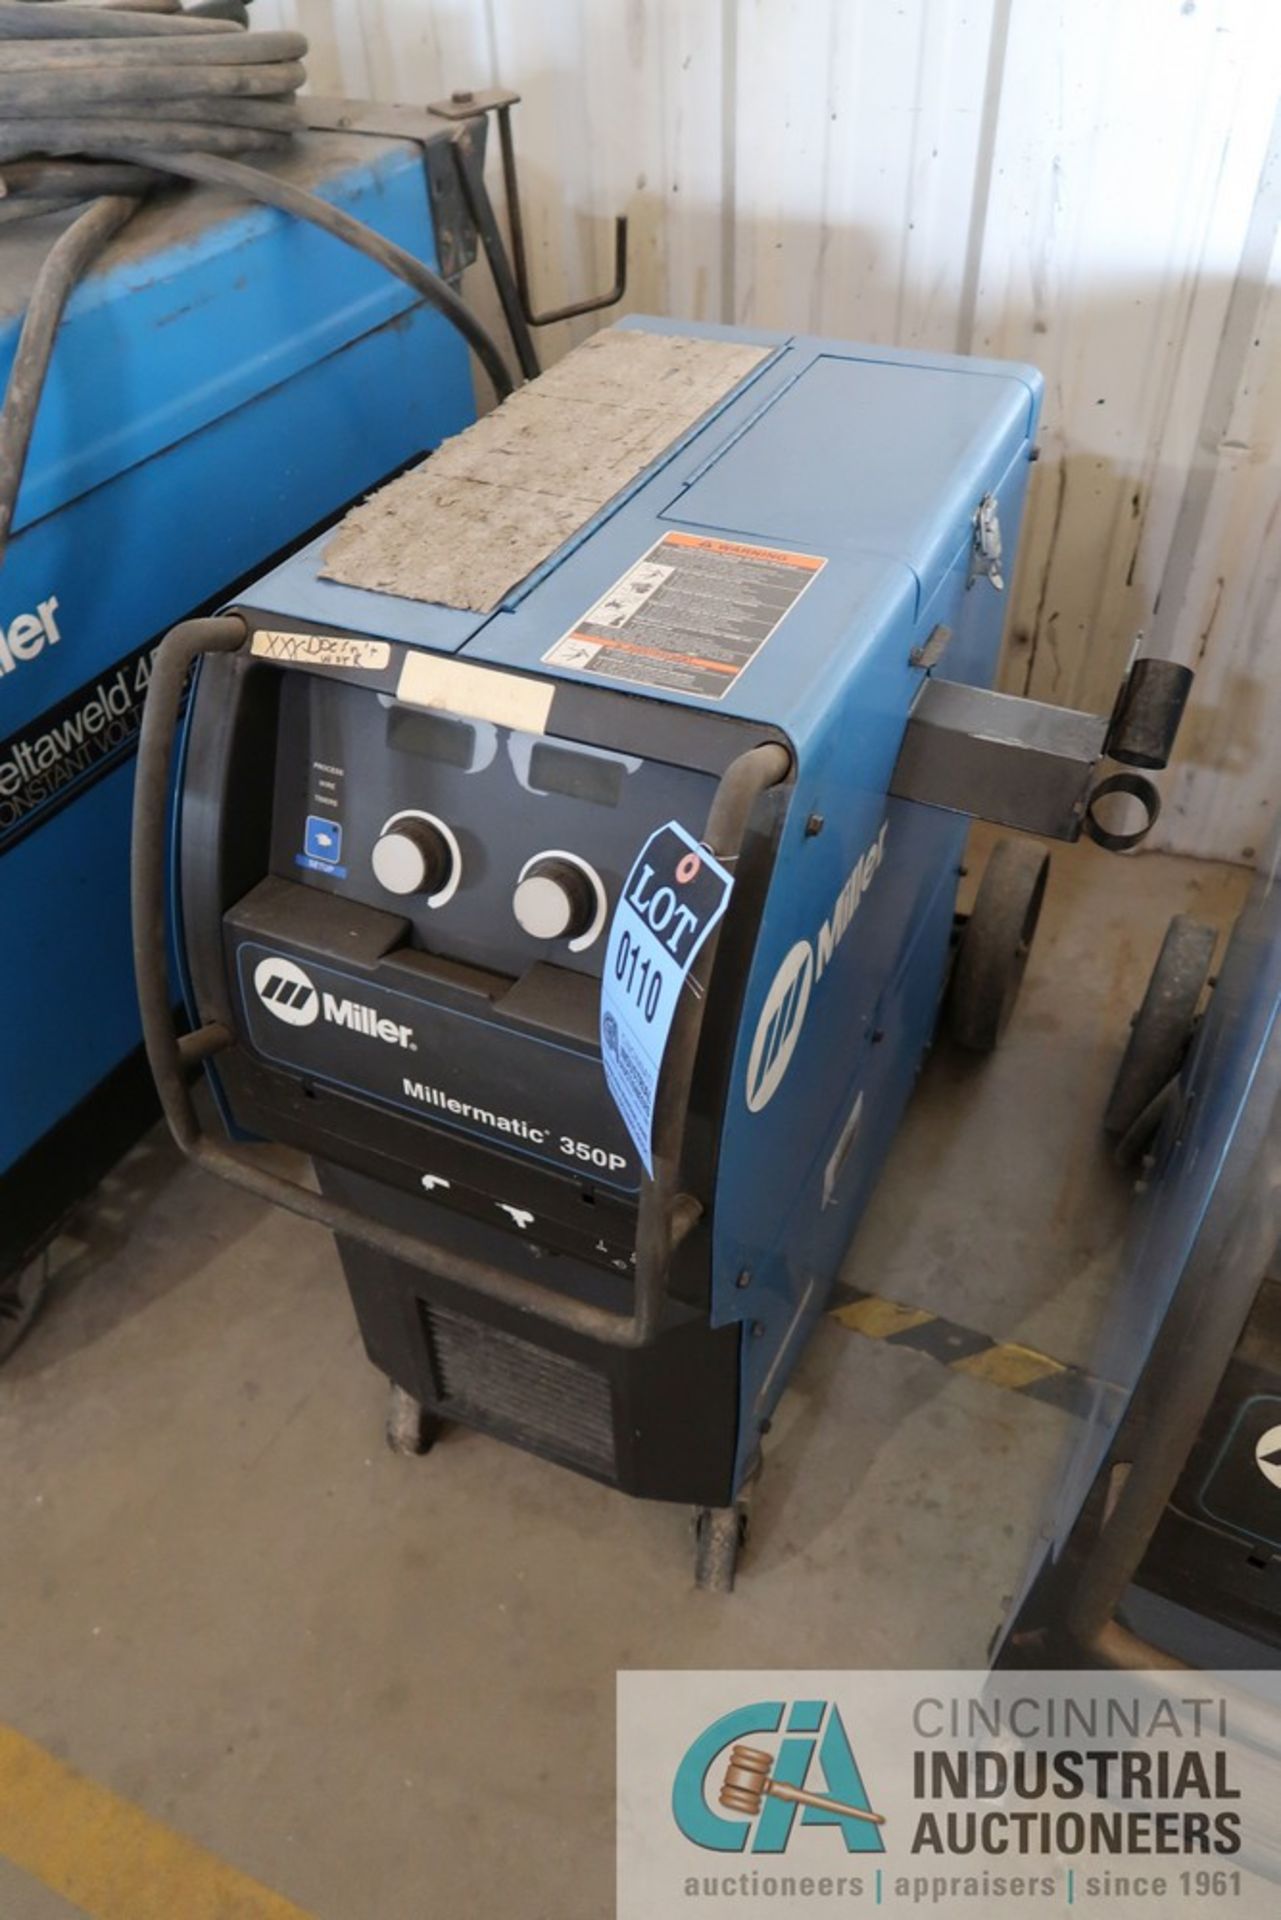 MILLER MODEL MILLERMATIC 350P MIG WELDING POWER SOURCE S/N LF046459 WITH BUILT-IN WIRE FEEDER * - Image 2 of 4